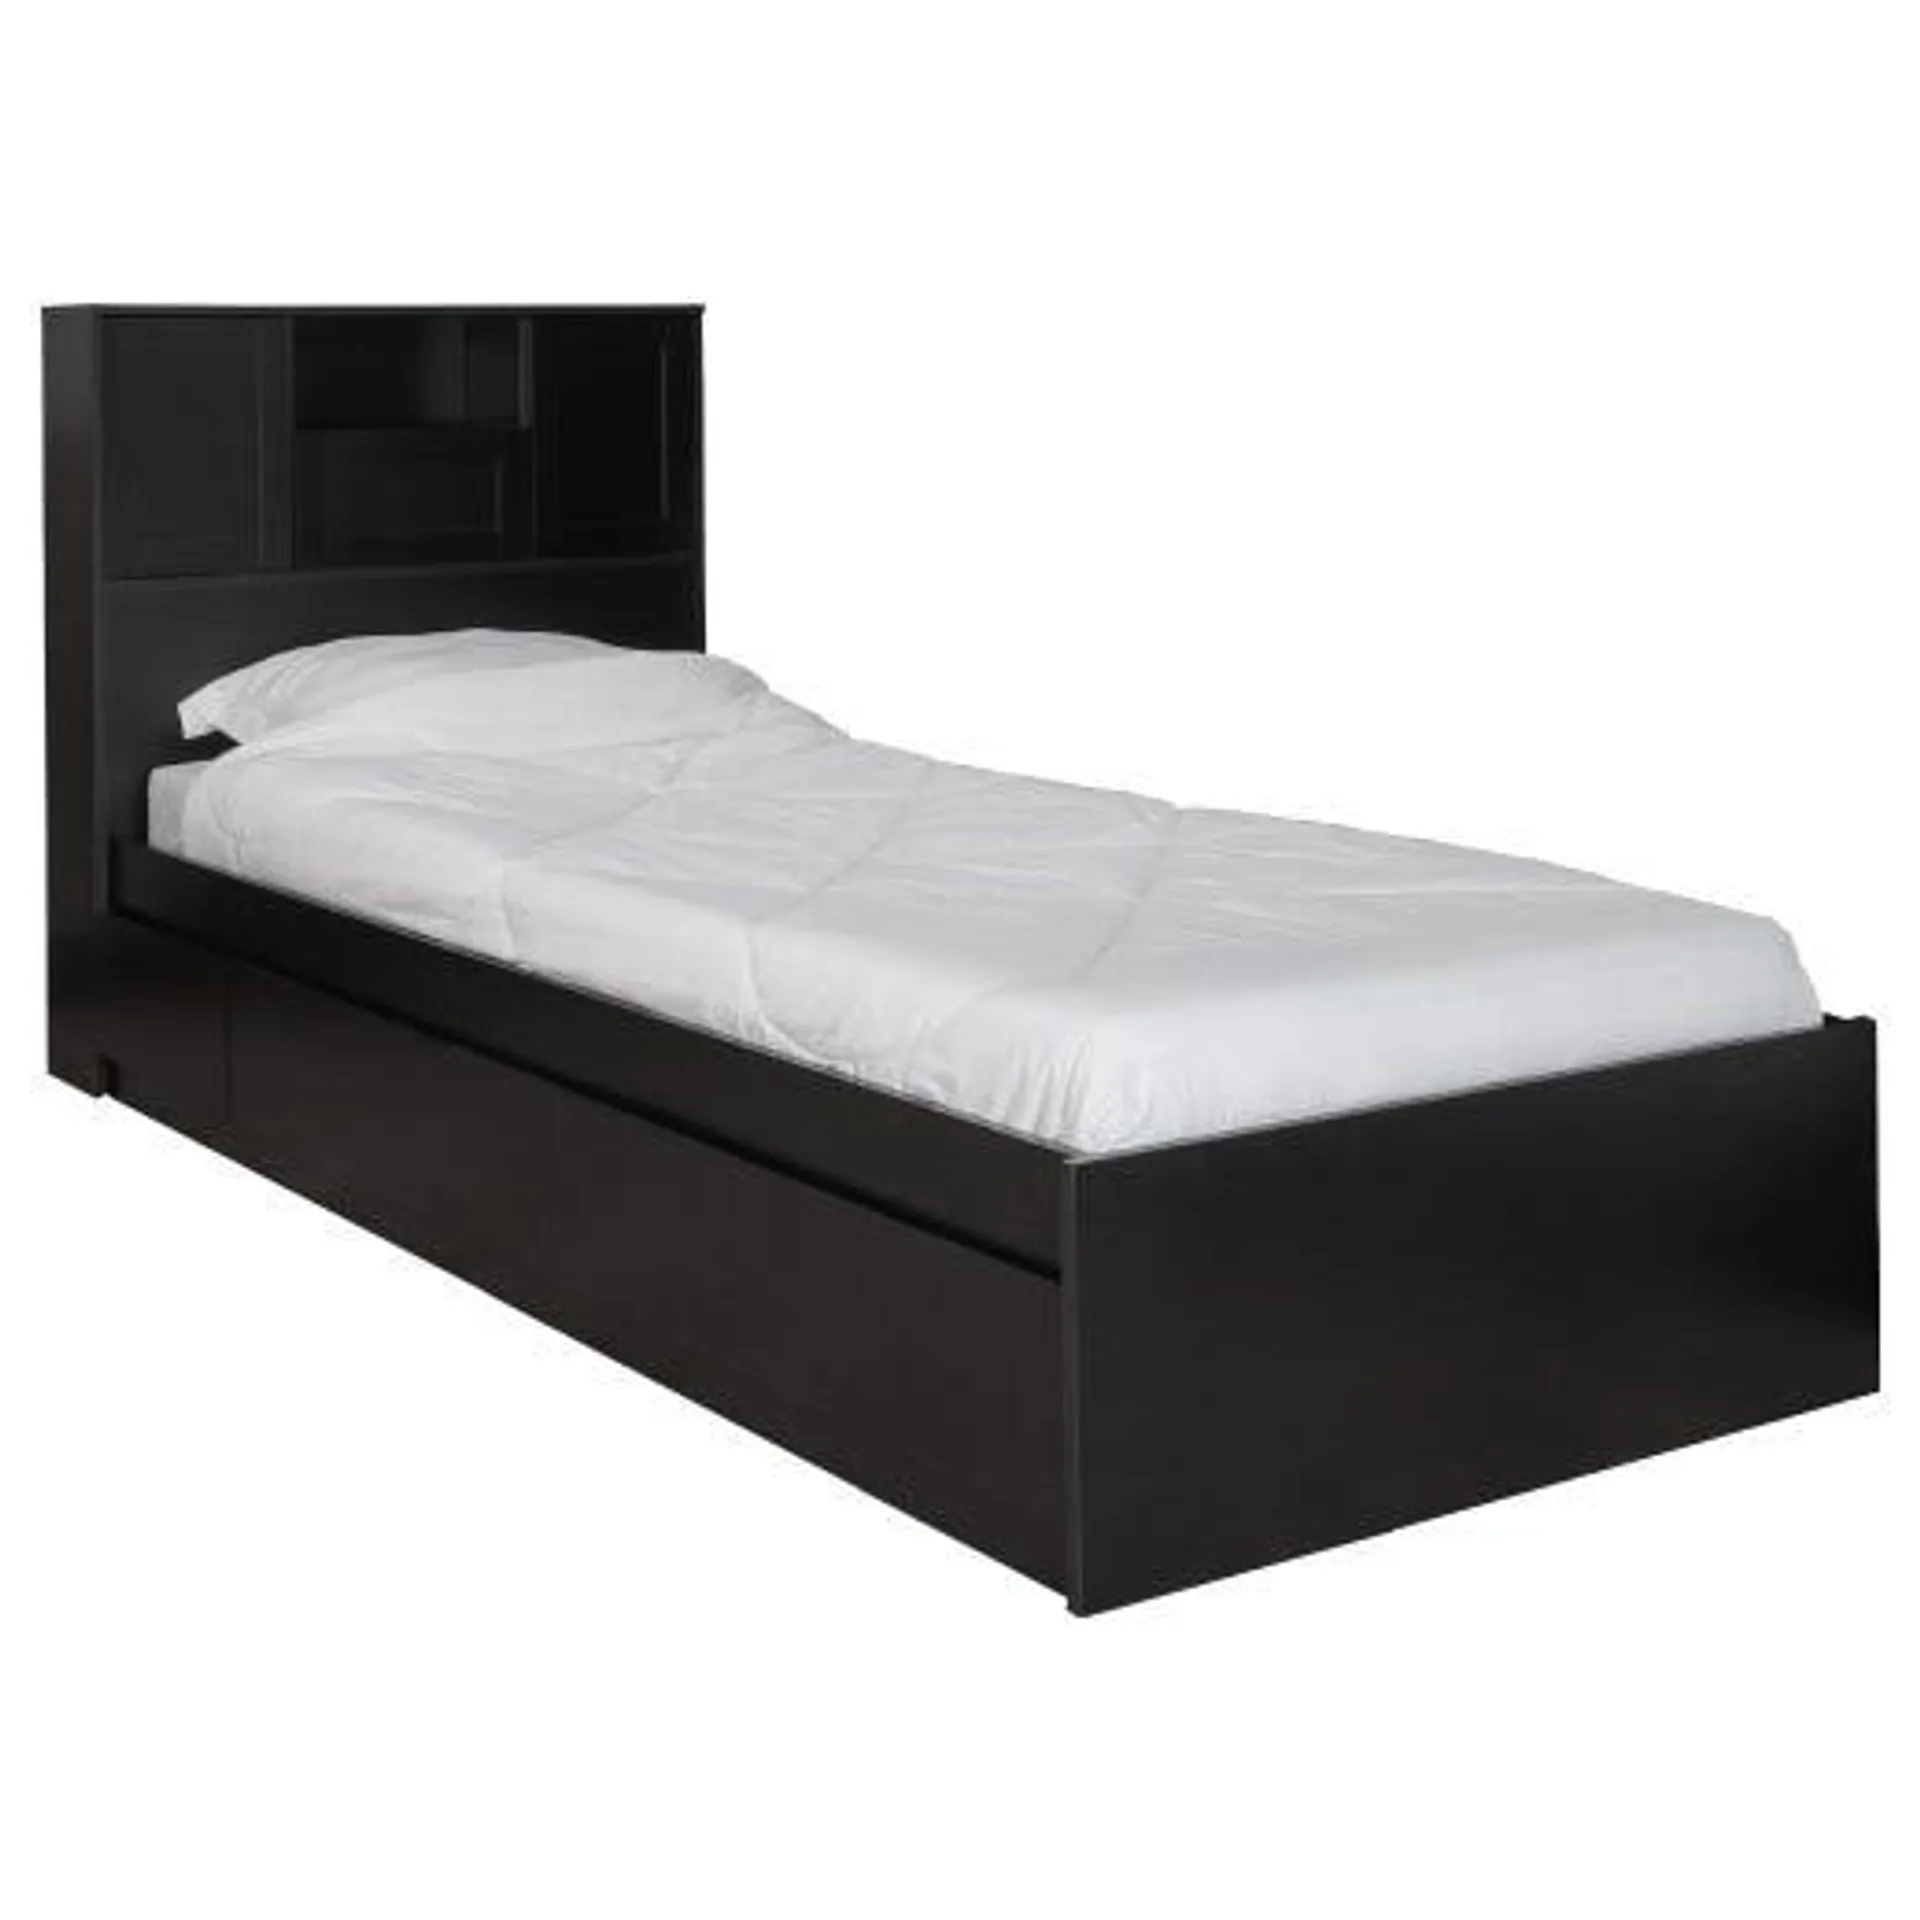 Bed Frame With Storage (Twin)